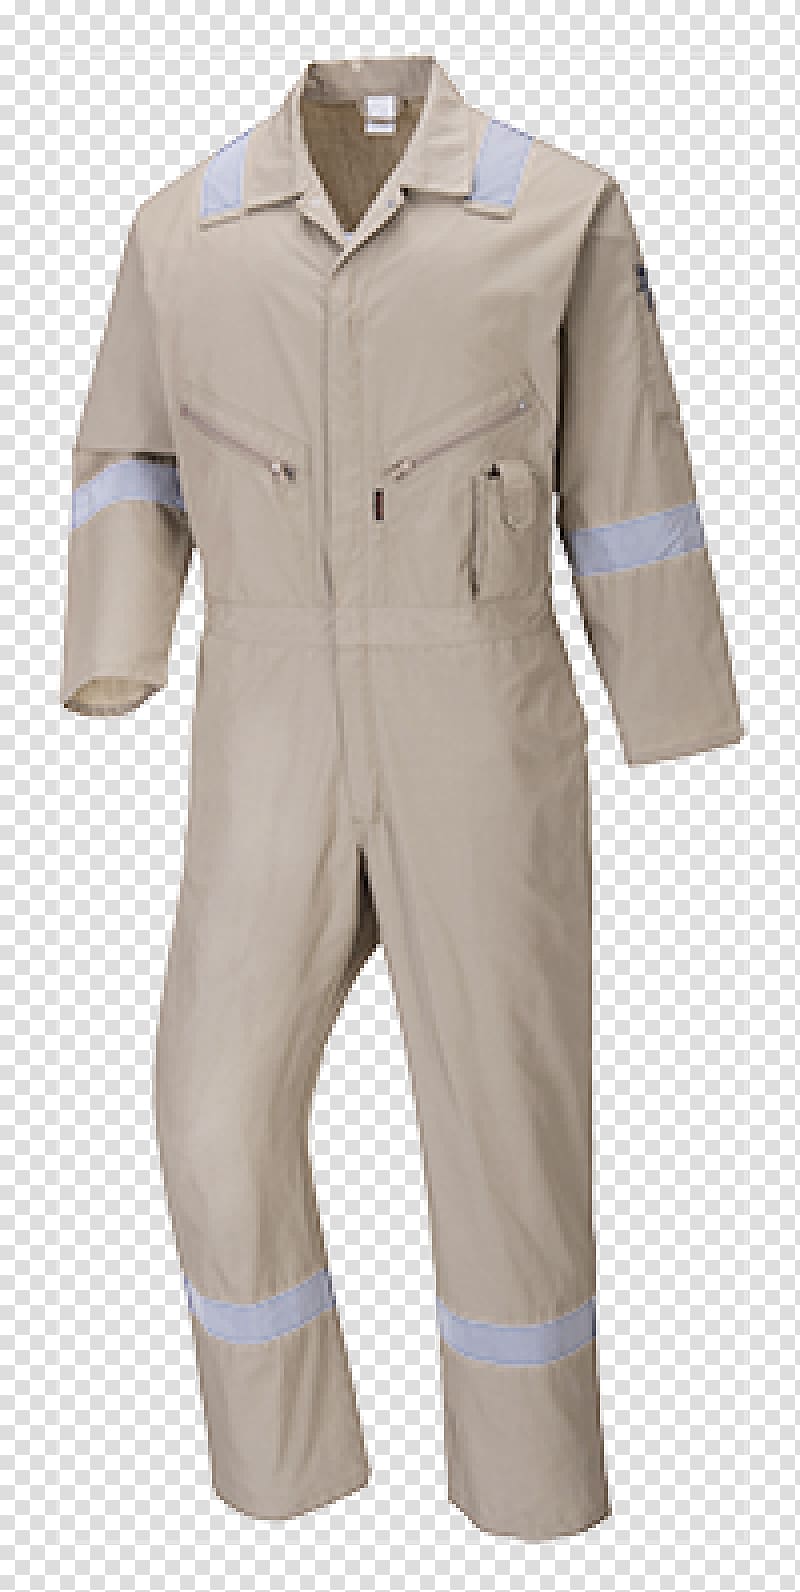 Workwear Boilersuit Overall Pants Clothing, polo shirt transparent background PNG clipart